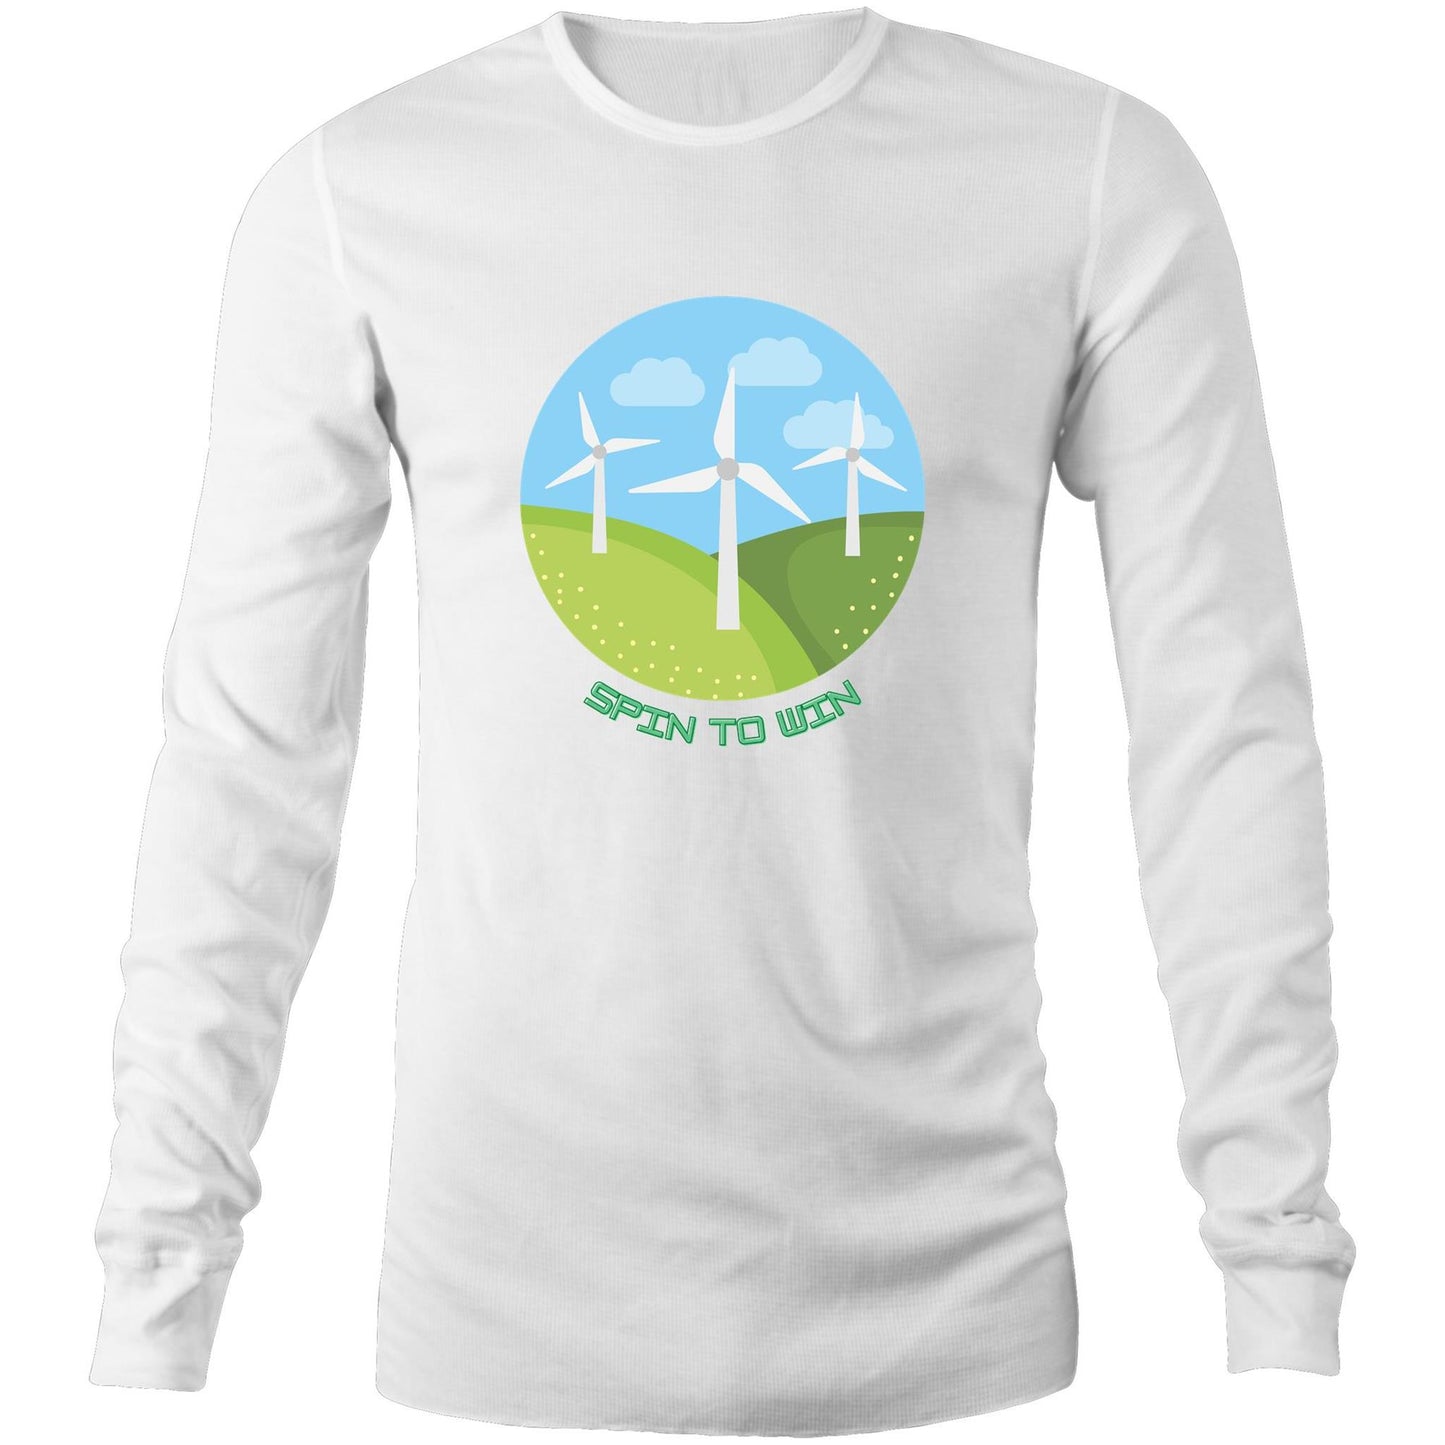 Spin To Win - Long Sleeve T-Shirt White Unisex Long Sleeve T-shirt Environment Mens Womens